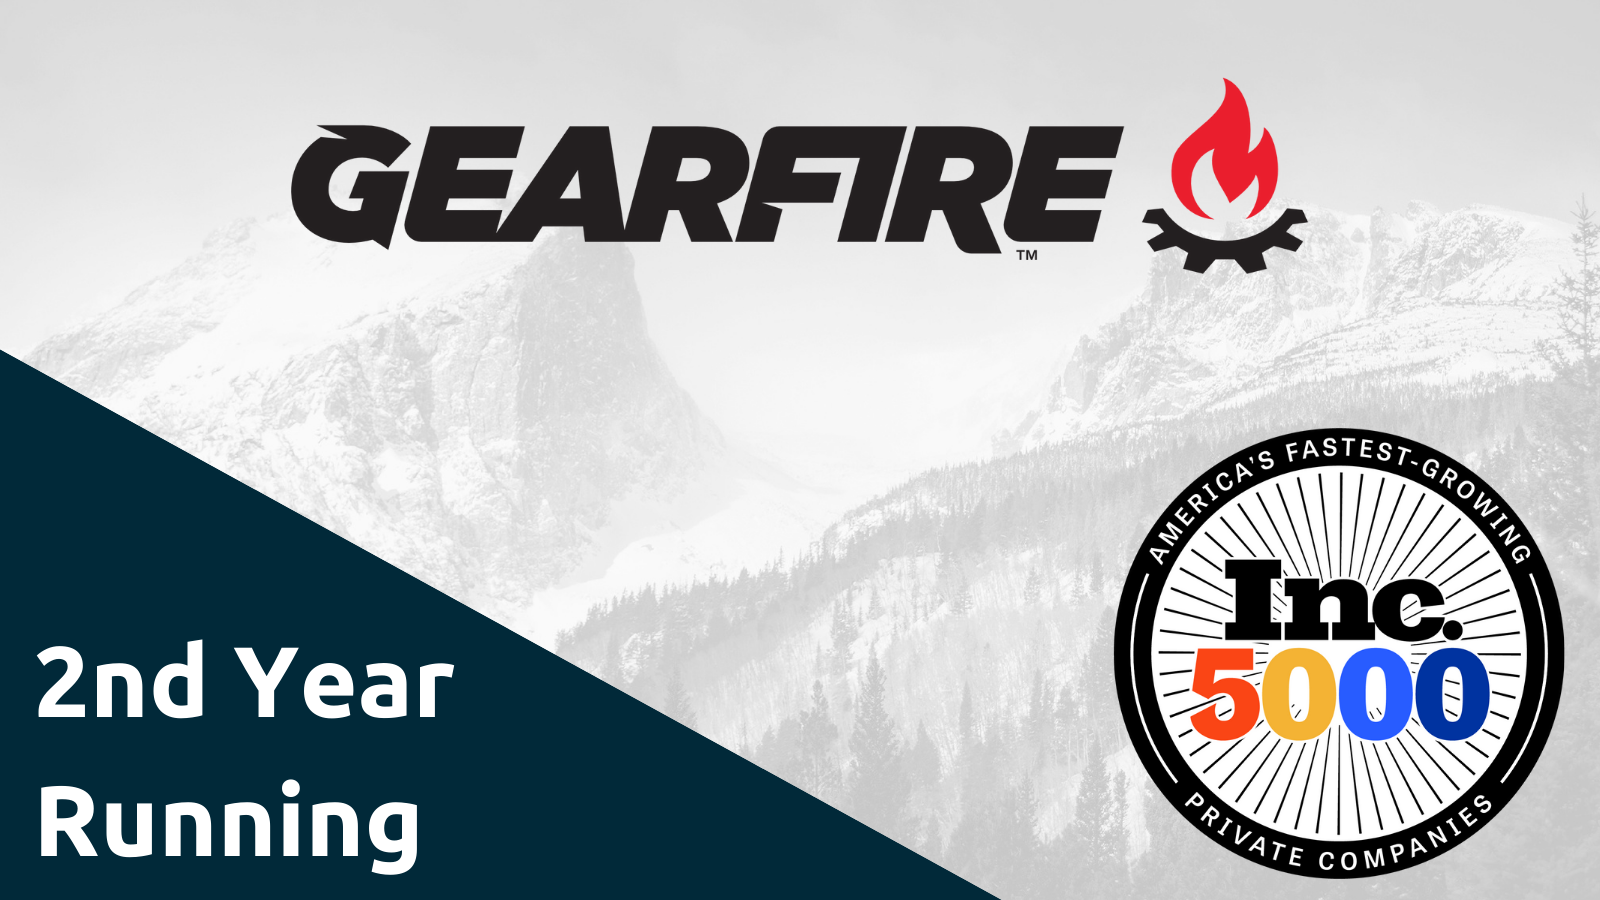 For the 2nd Time, Gearfire Appears on The Inc. 5000 as One of The Fastest-Growing Private Companies in America featured img